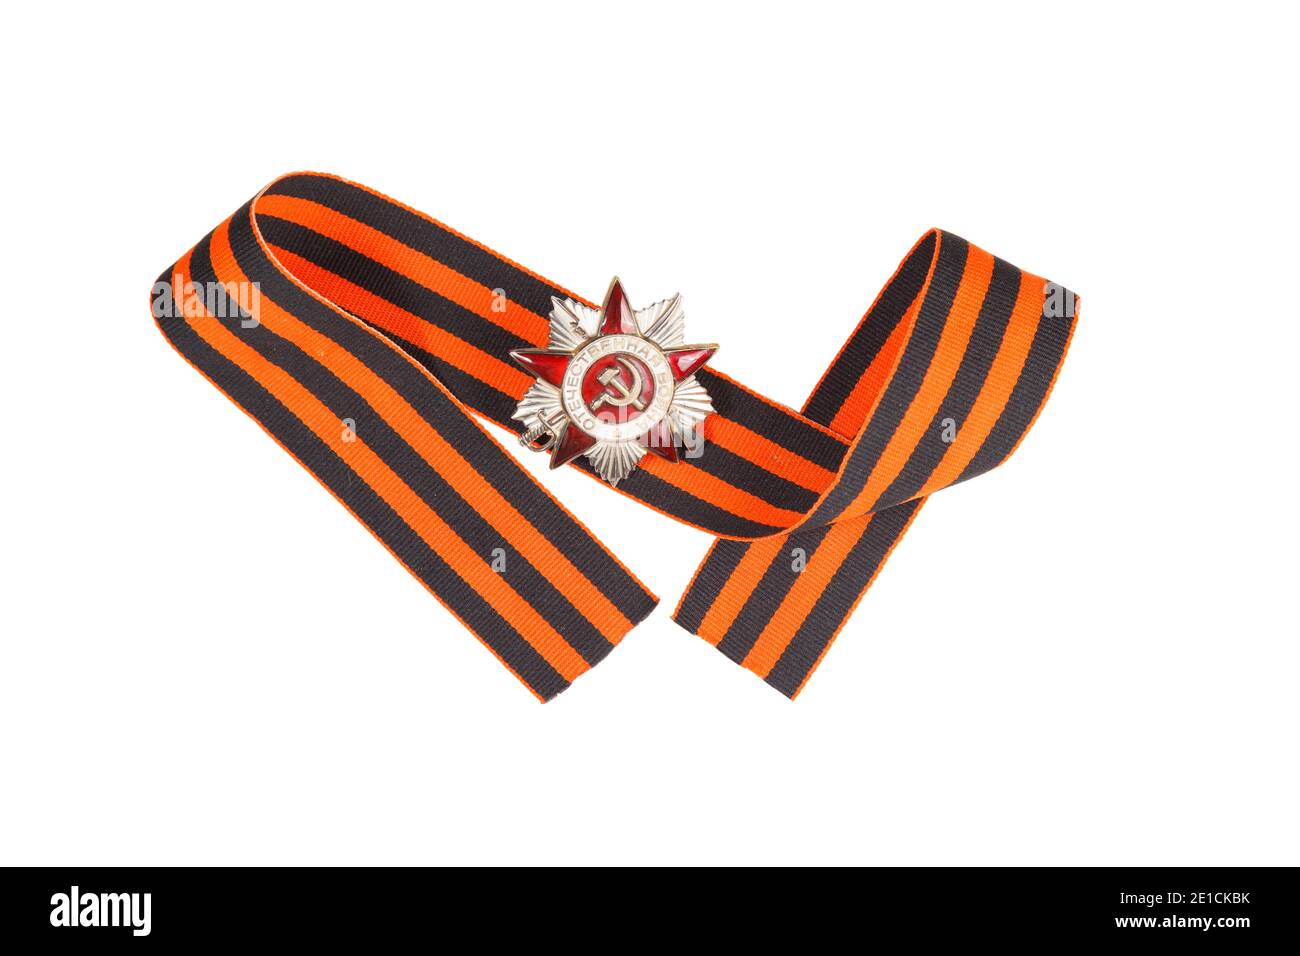 Awards of the USSR. Order of the Great Patriotic War and St. George Ribbon. illustrative editorial. Stock Photo